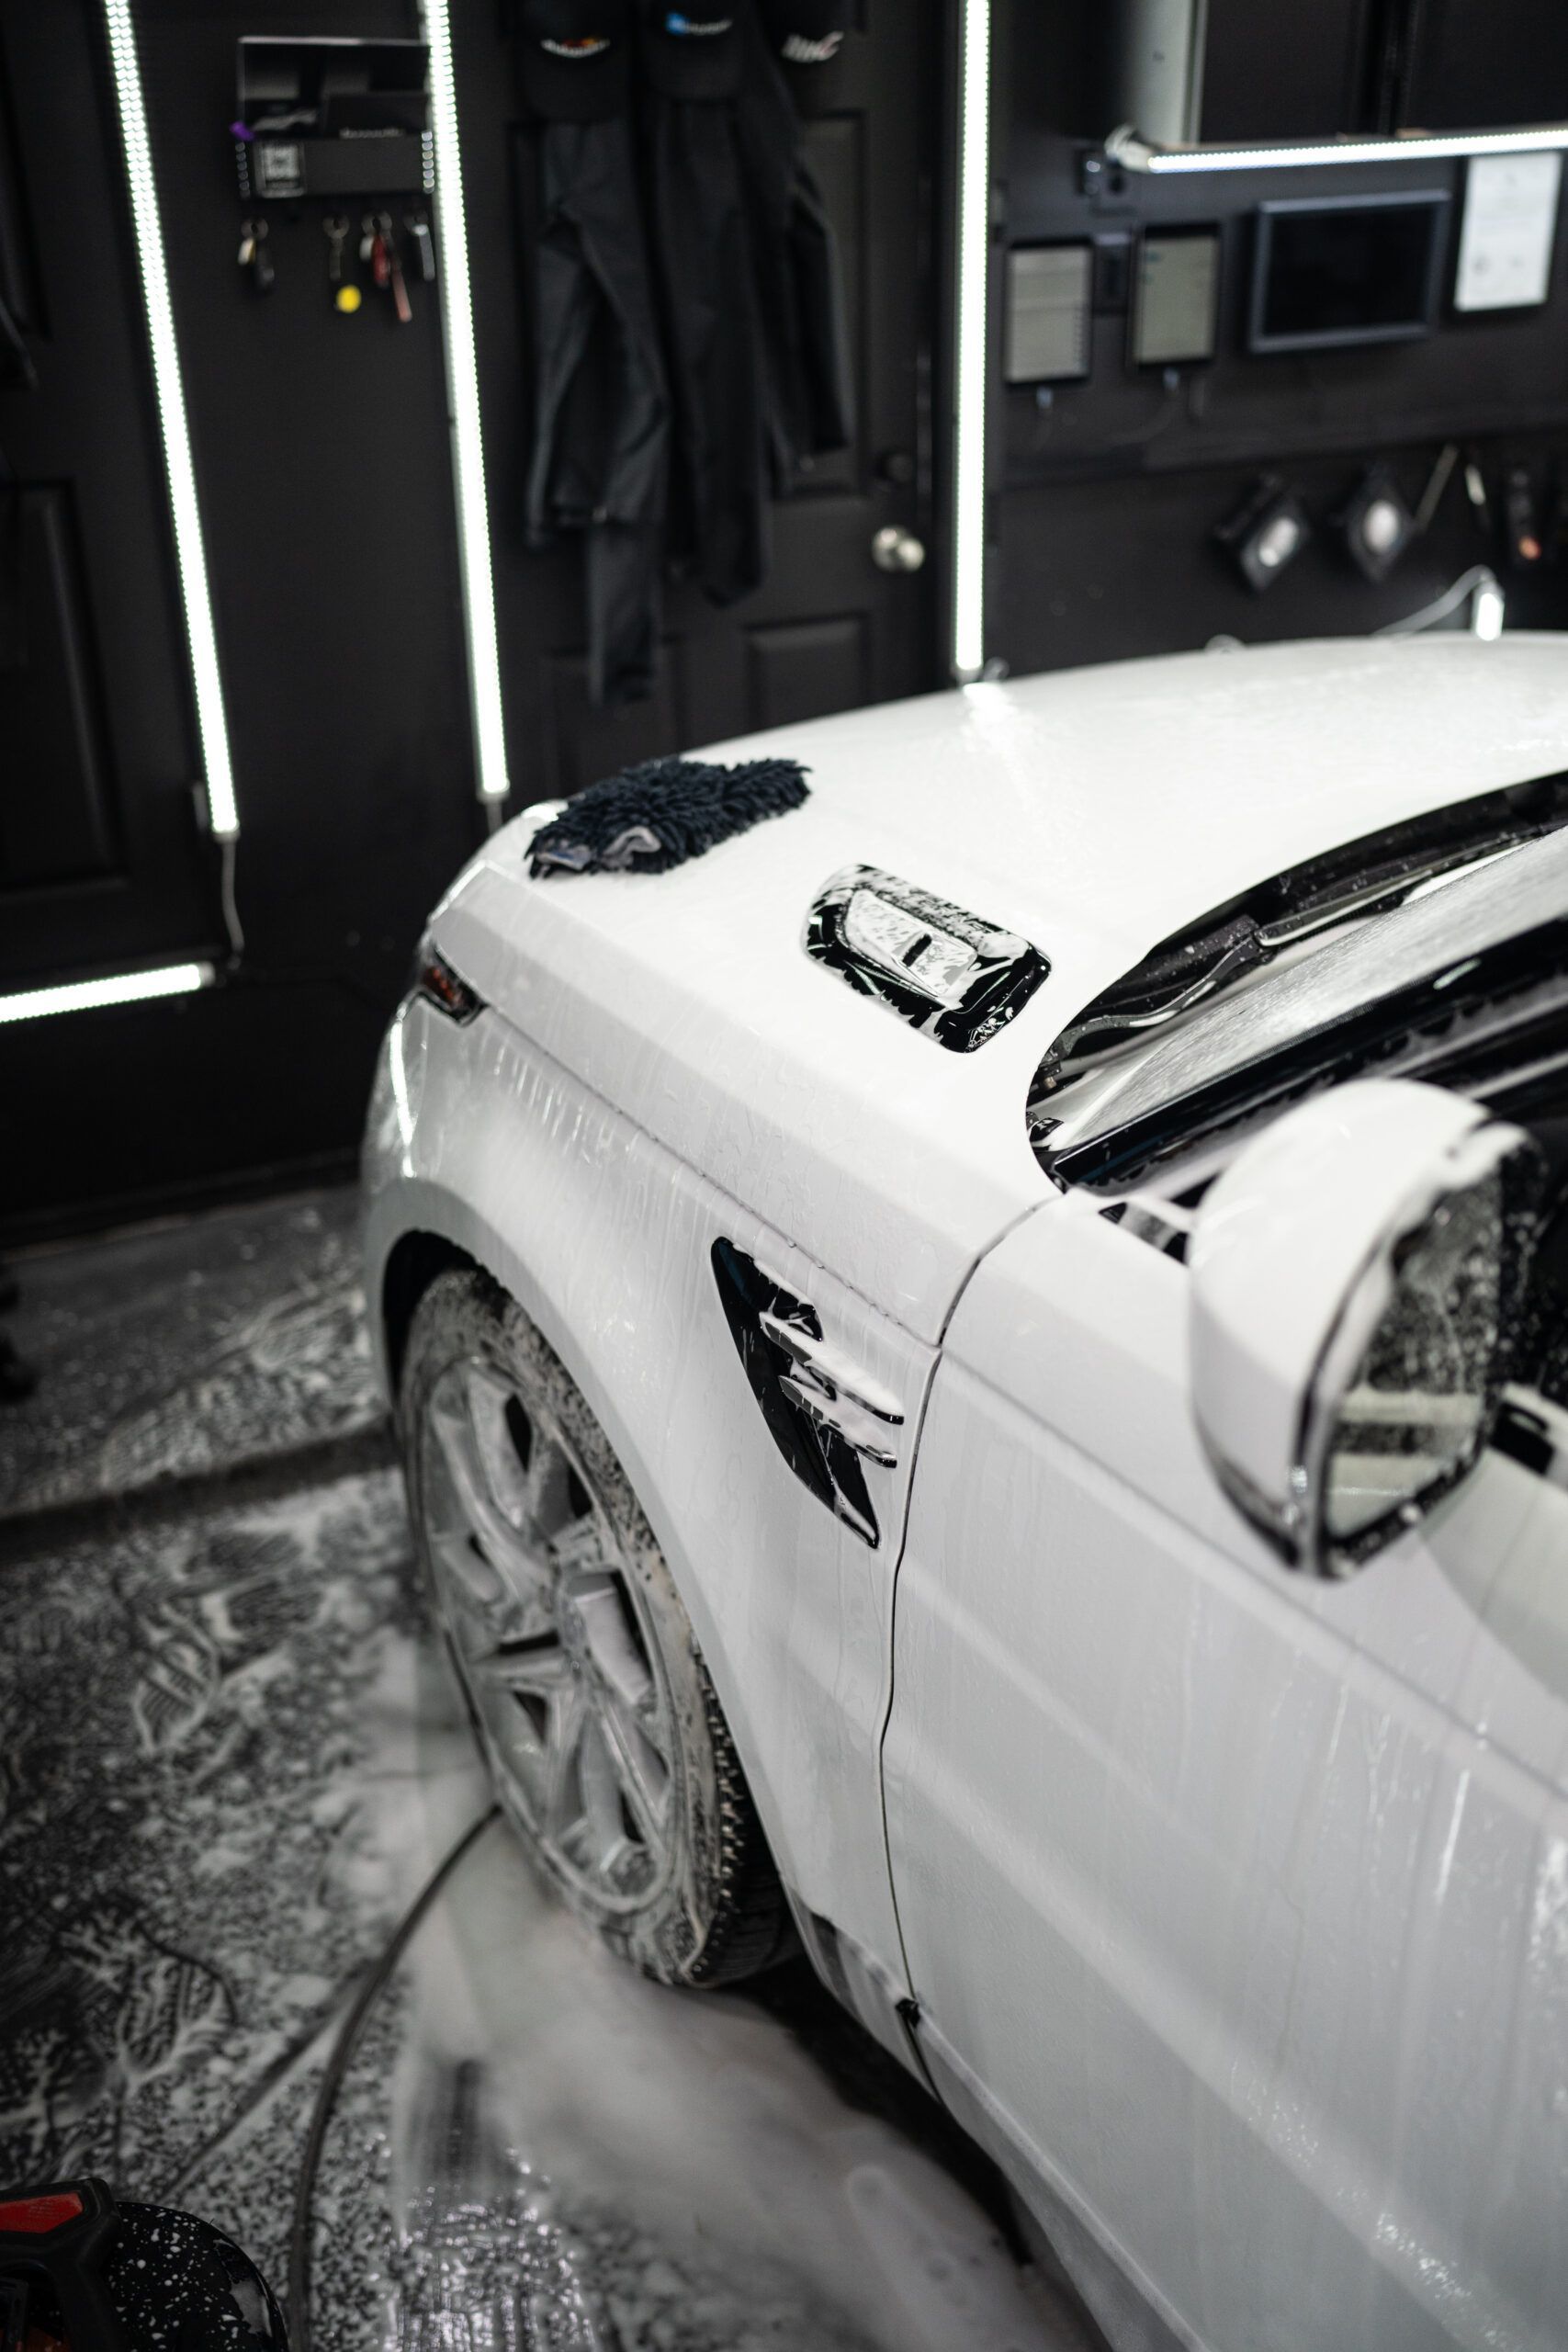 A white range rover is being washed in a garage.